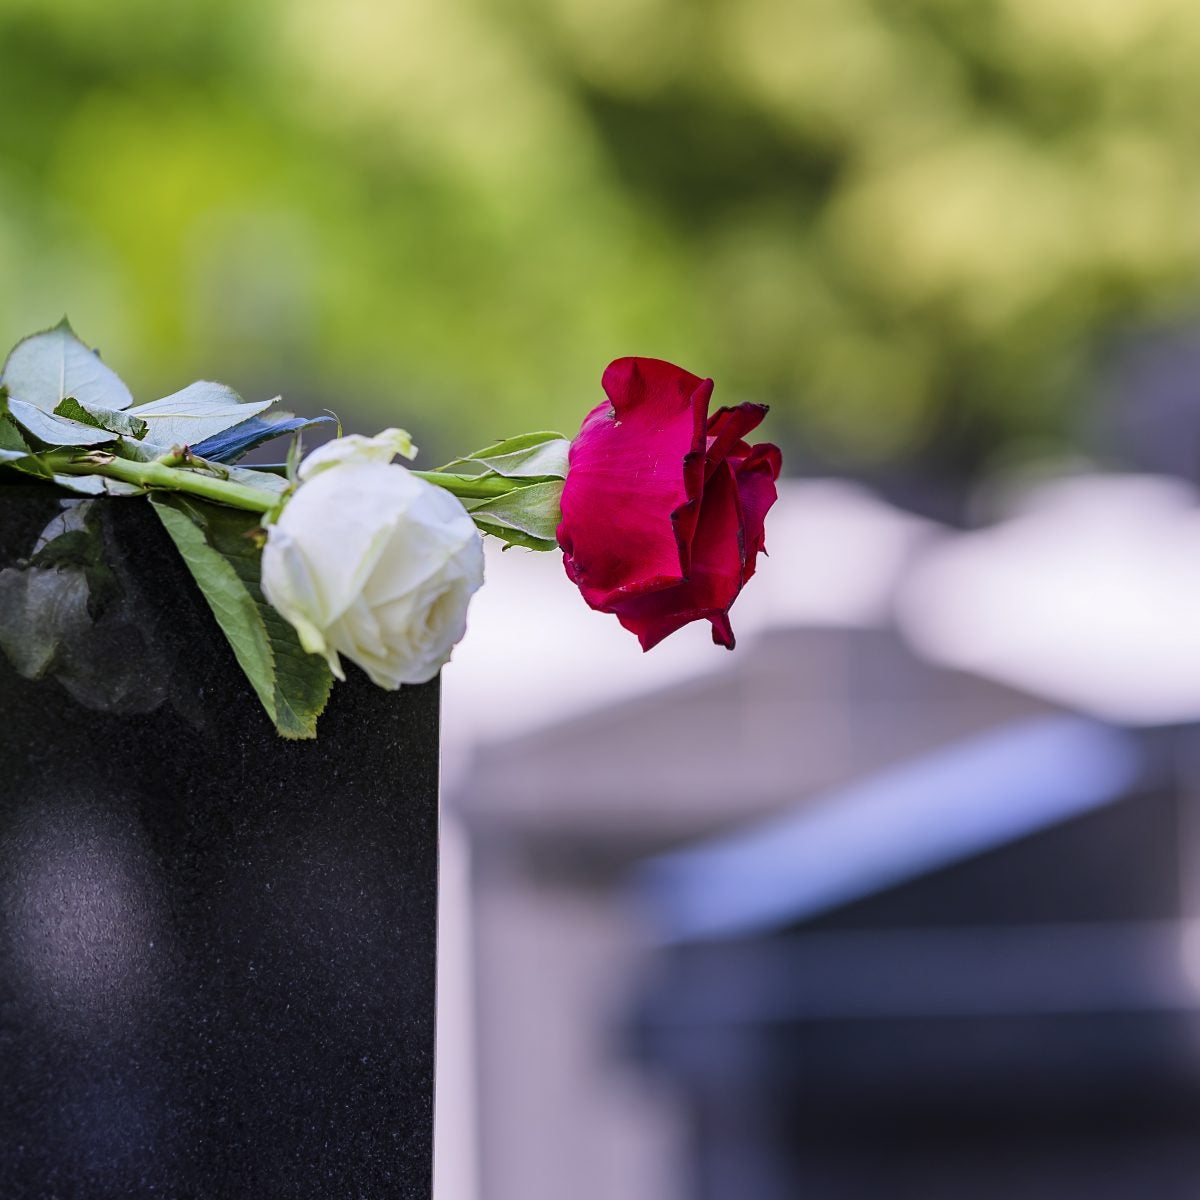 Six Dead Of Coronavirus After Attending Funeral In South Carolina